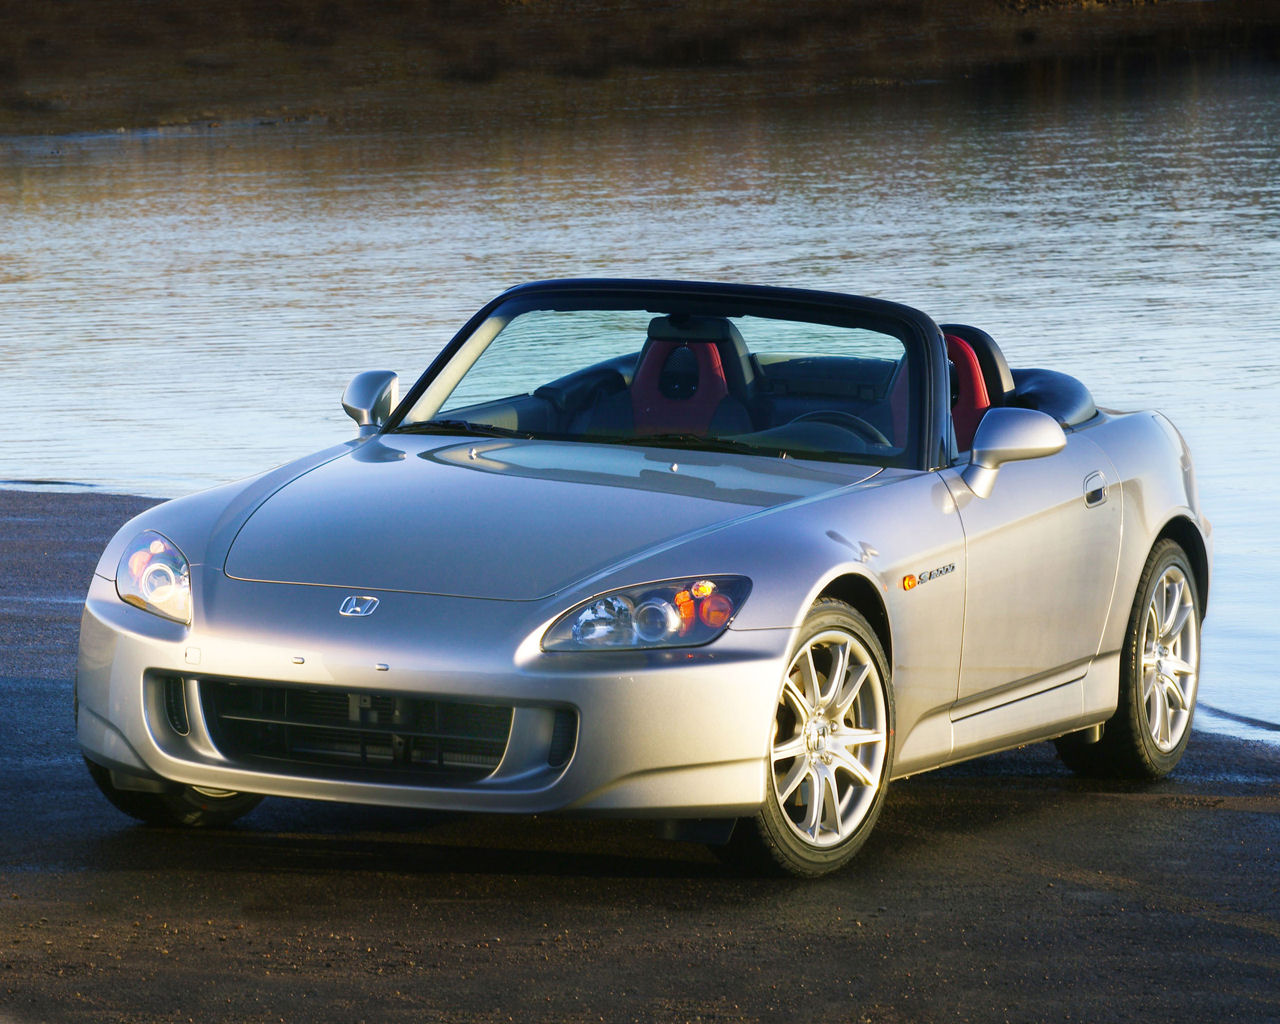 Please Right Click On The Honda S2000 Wallpaper Below And Choose